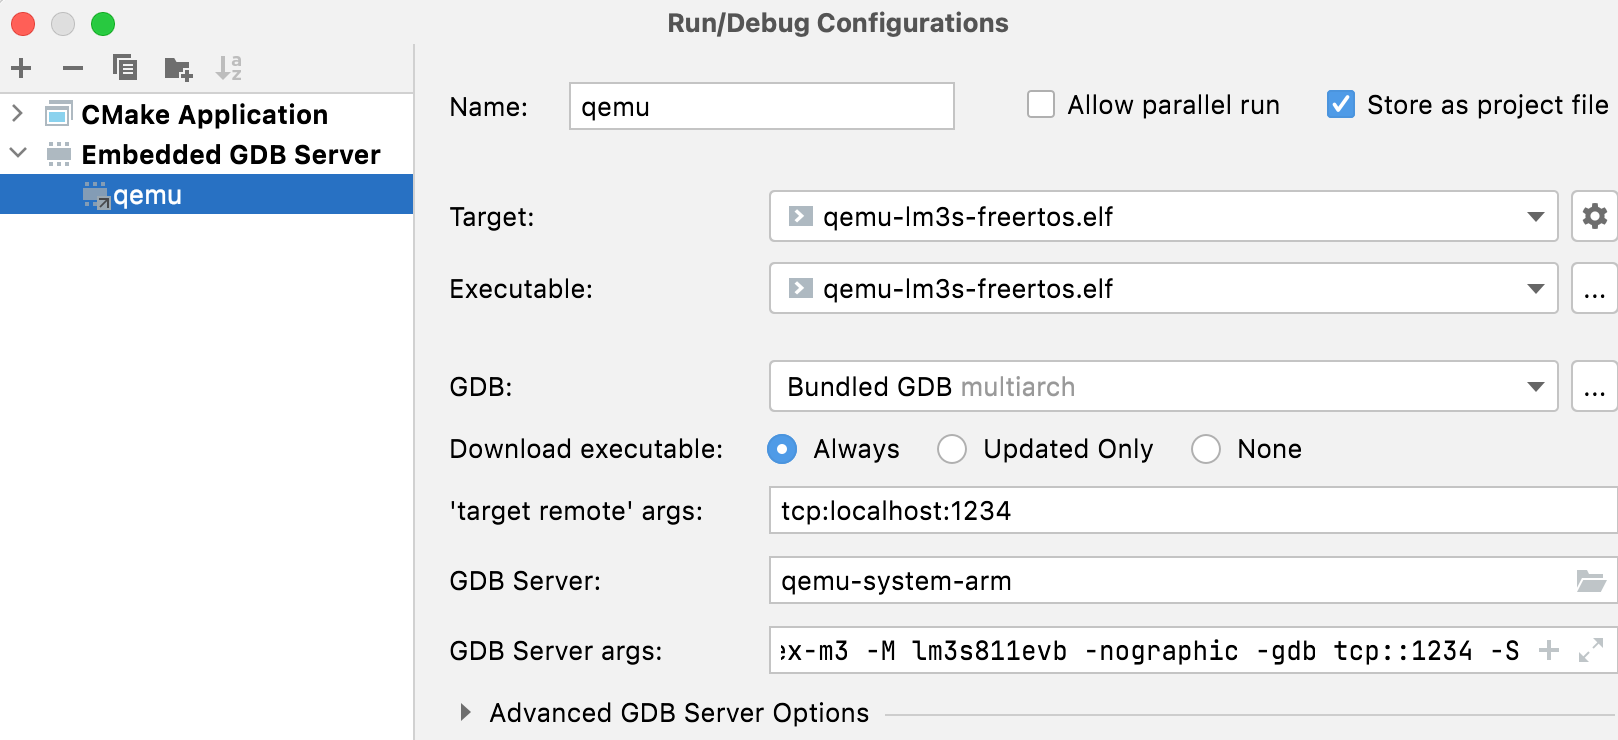 Embedded GDB Server configuration example